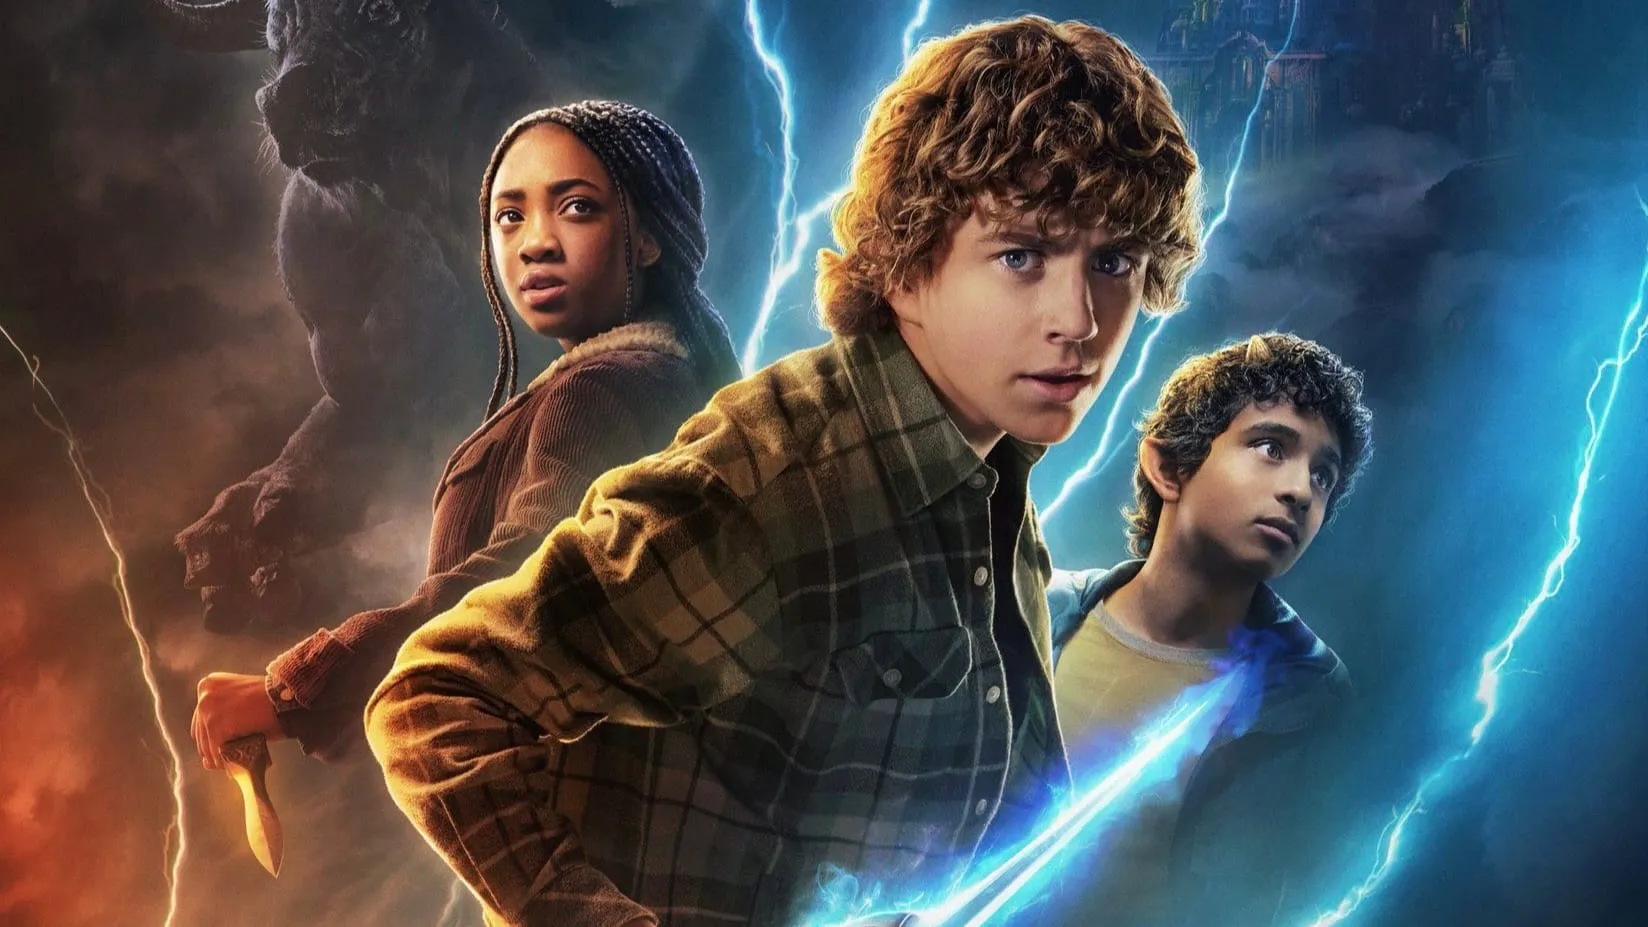 Percy Jackson and the Olympians Episode 6 Release Date, Preview, Spoilers & More